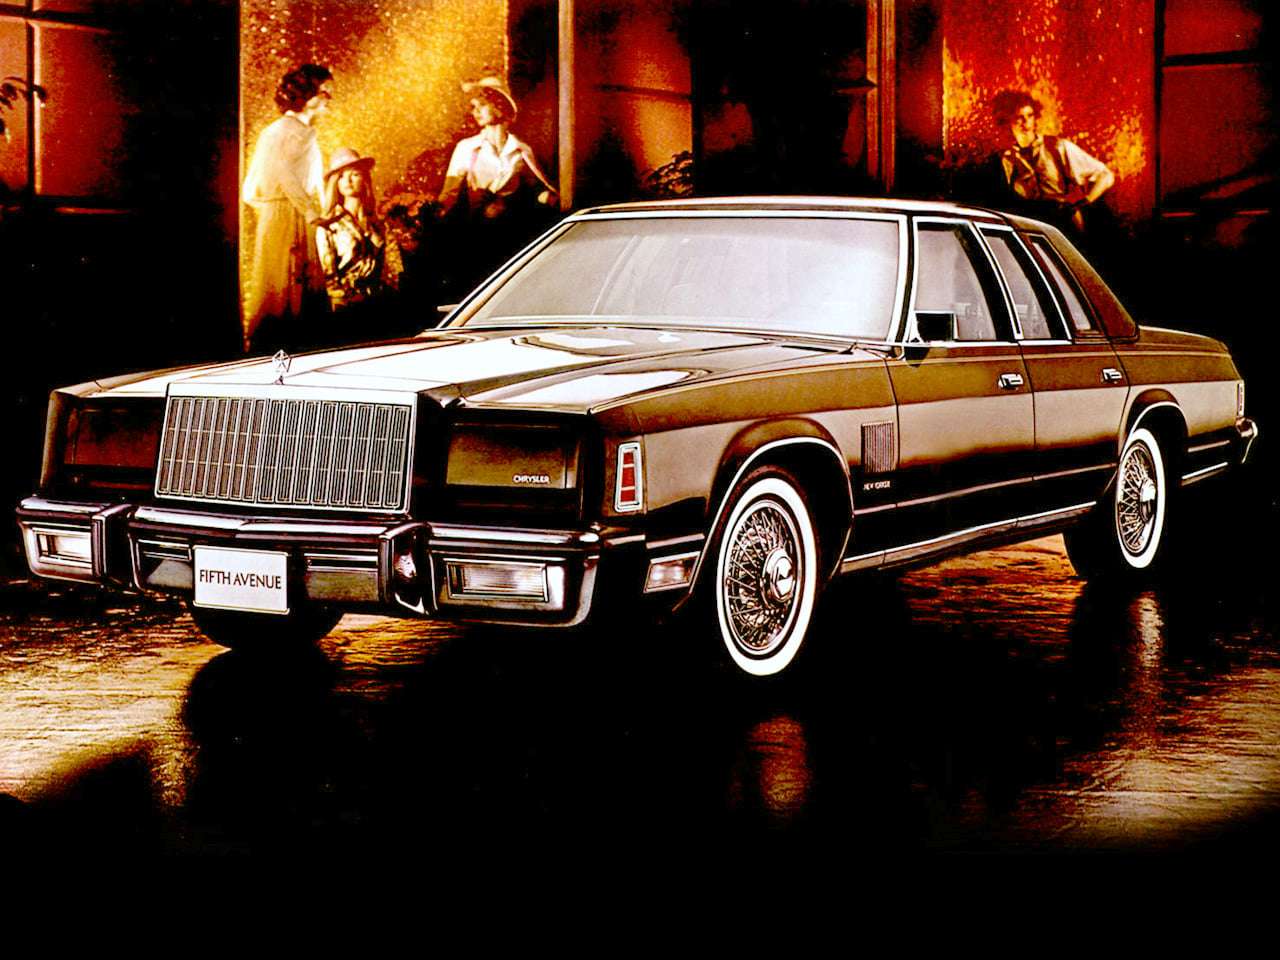 1980 Chrysler New Yorker Fifth Avenue Puzzlespiel online